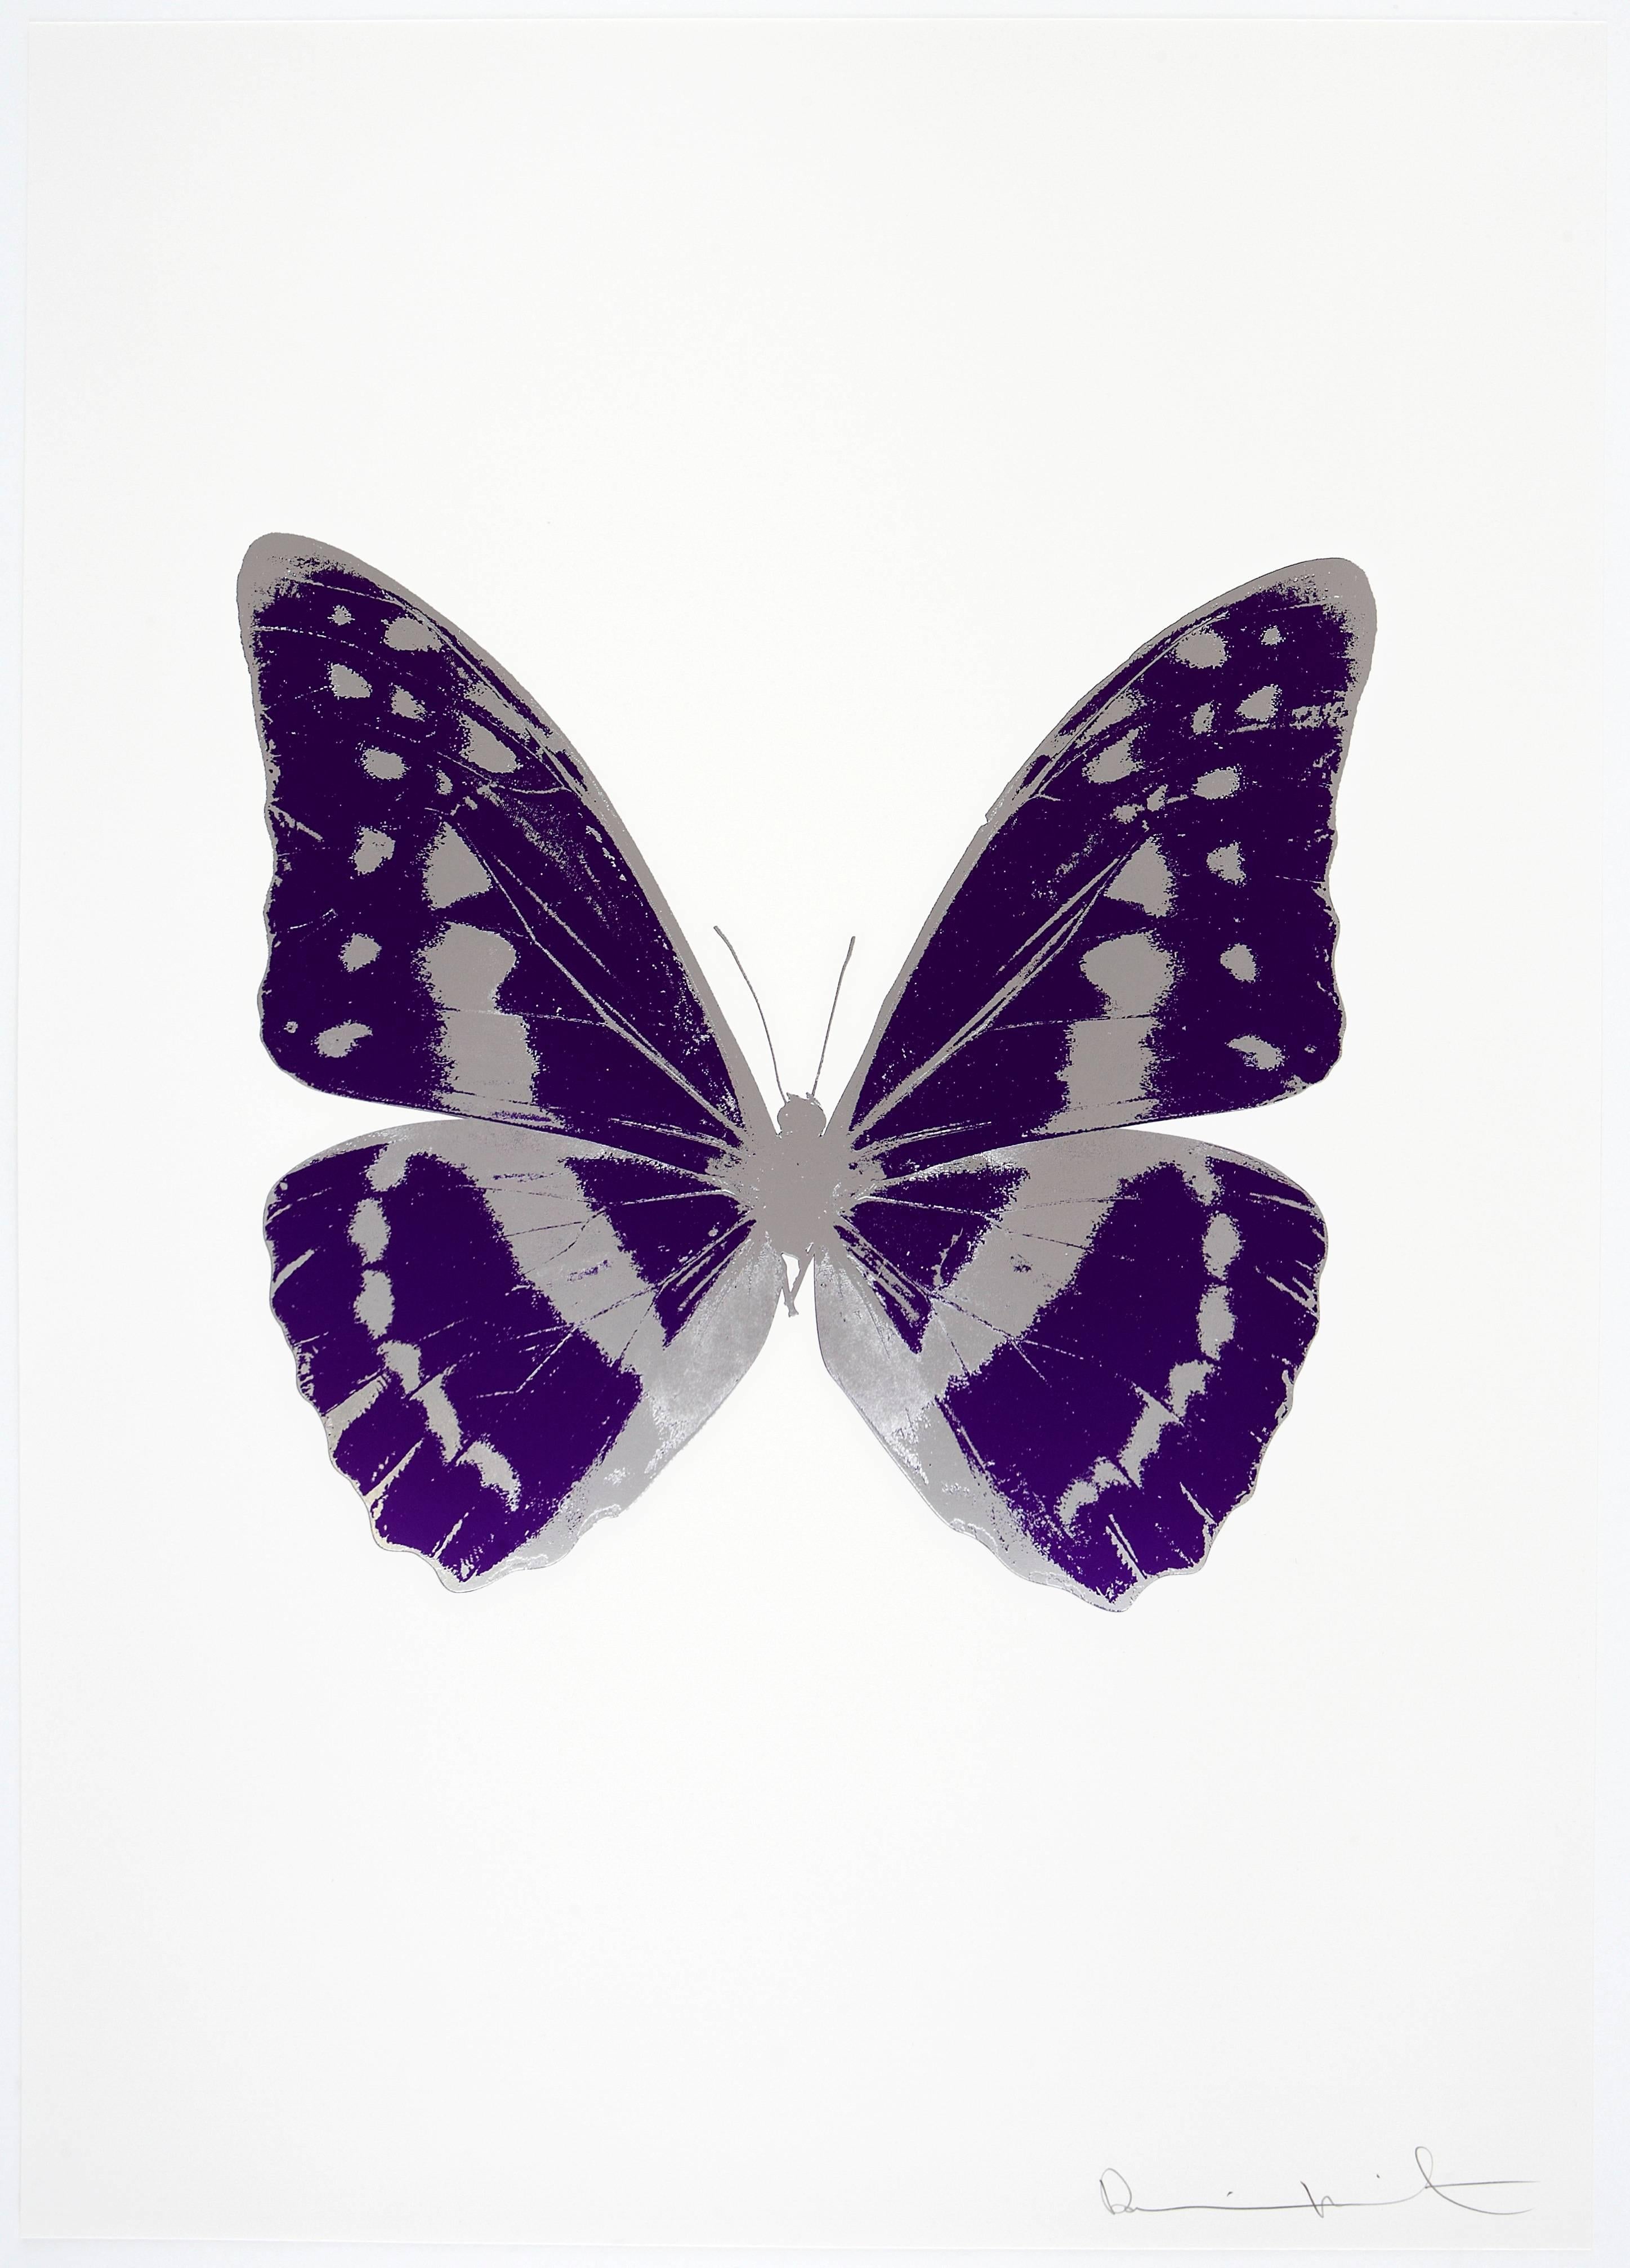 Damien Hirst Animal Print - The Souls III - Imperial Purple/Silver Gloss/Silver Gloss